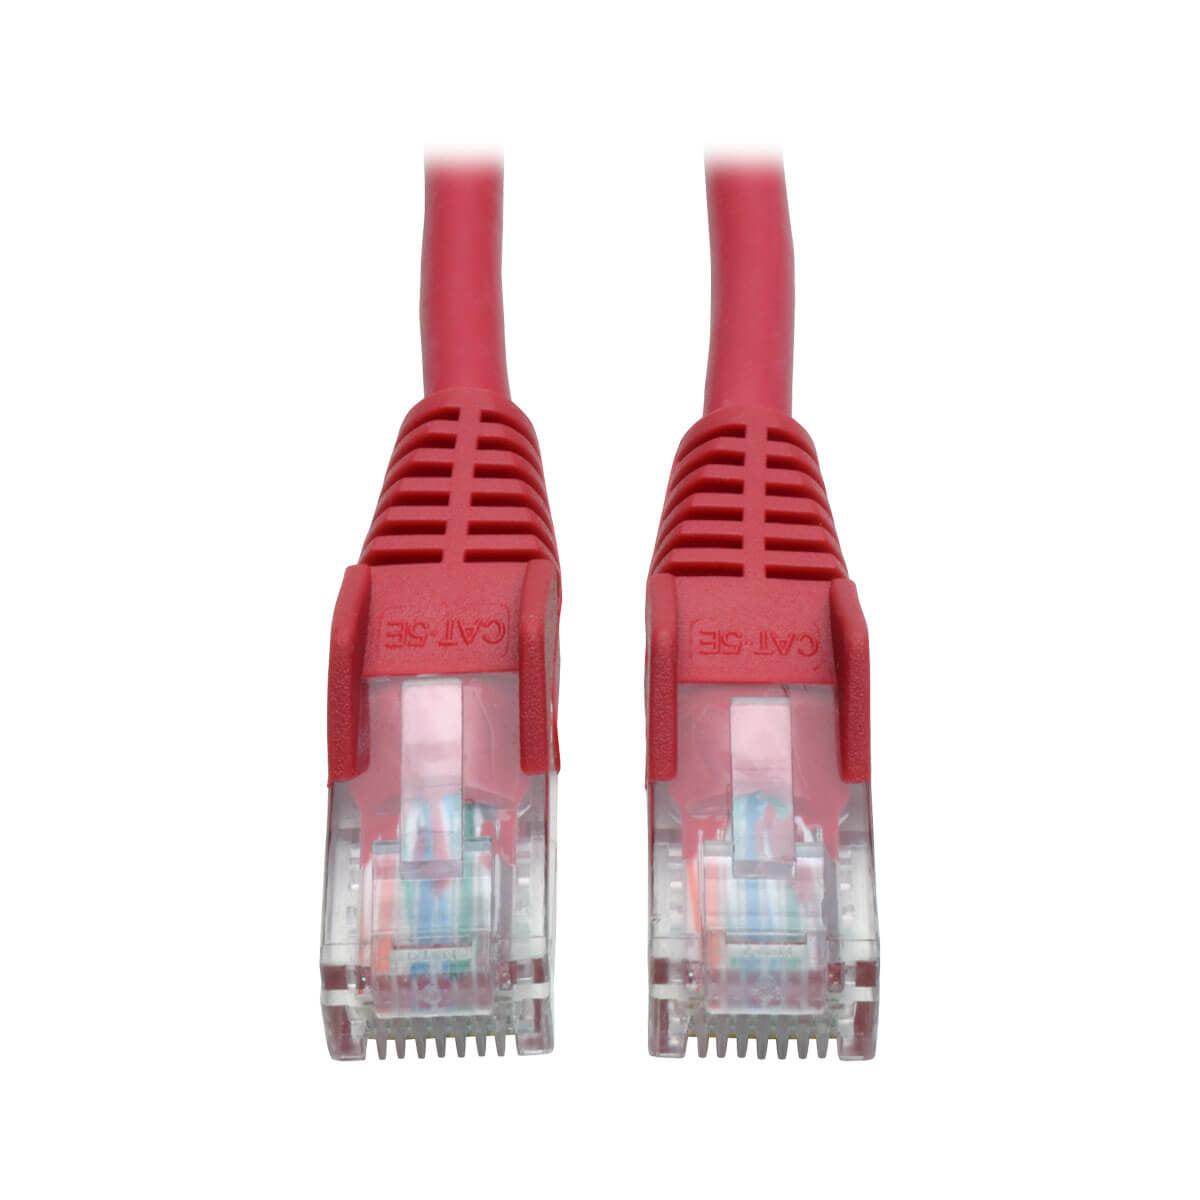 Tripp Lite N001-003-Rd Cat5E 350 Mhz Snagless Molded (Utp) Ethernet Cable (Rj45 M/M) - Red, 3 Ft. (0.91 M)